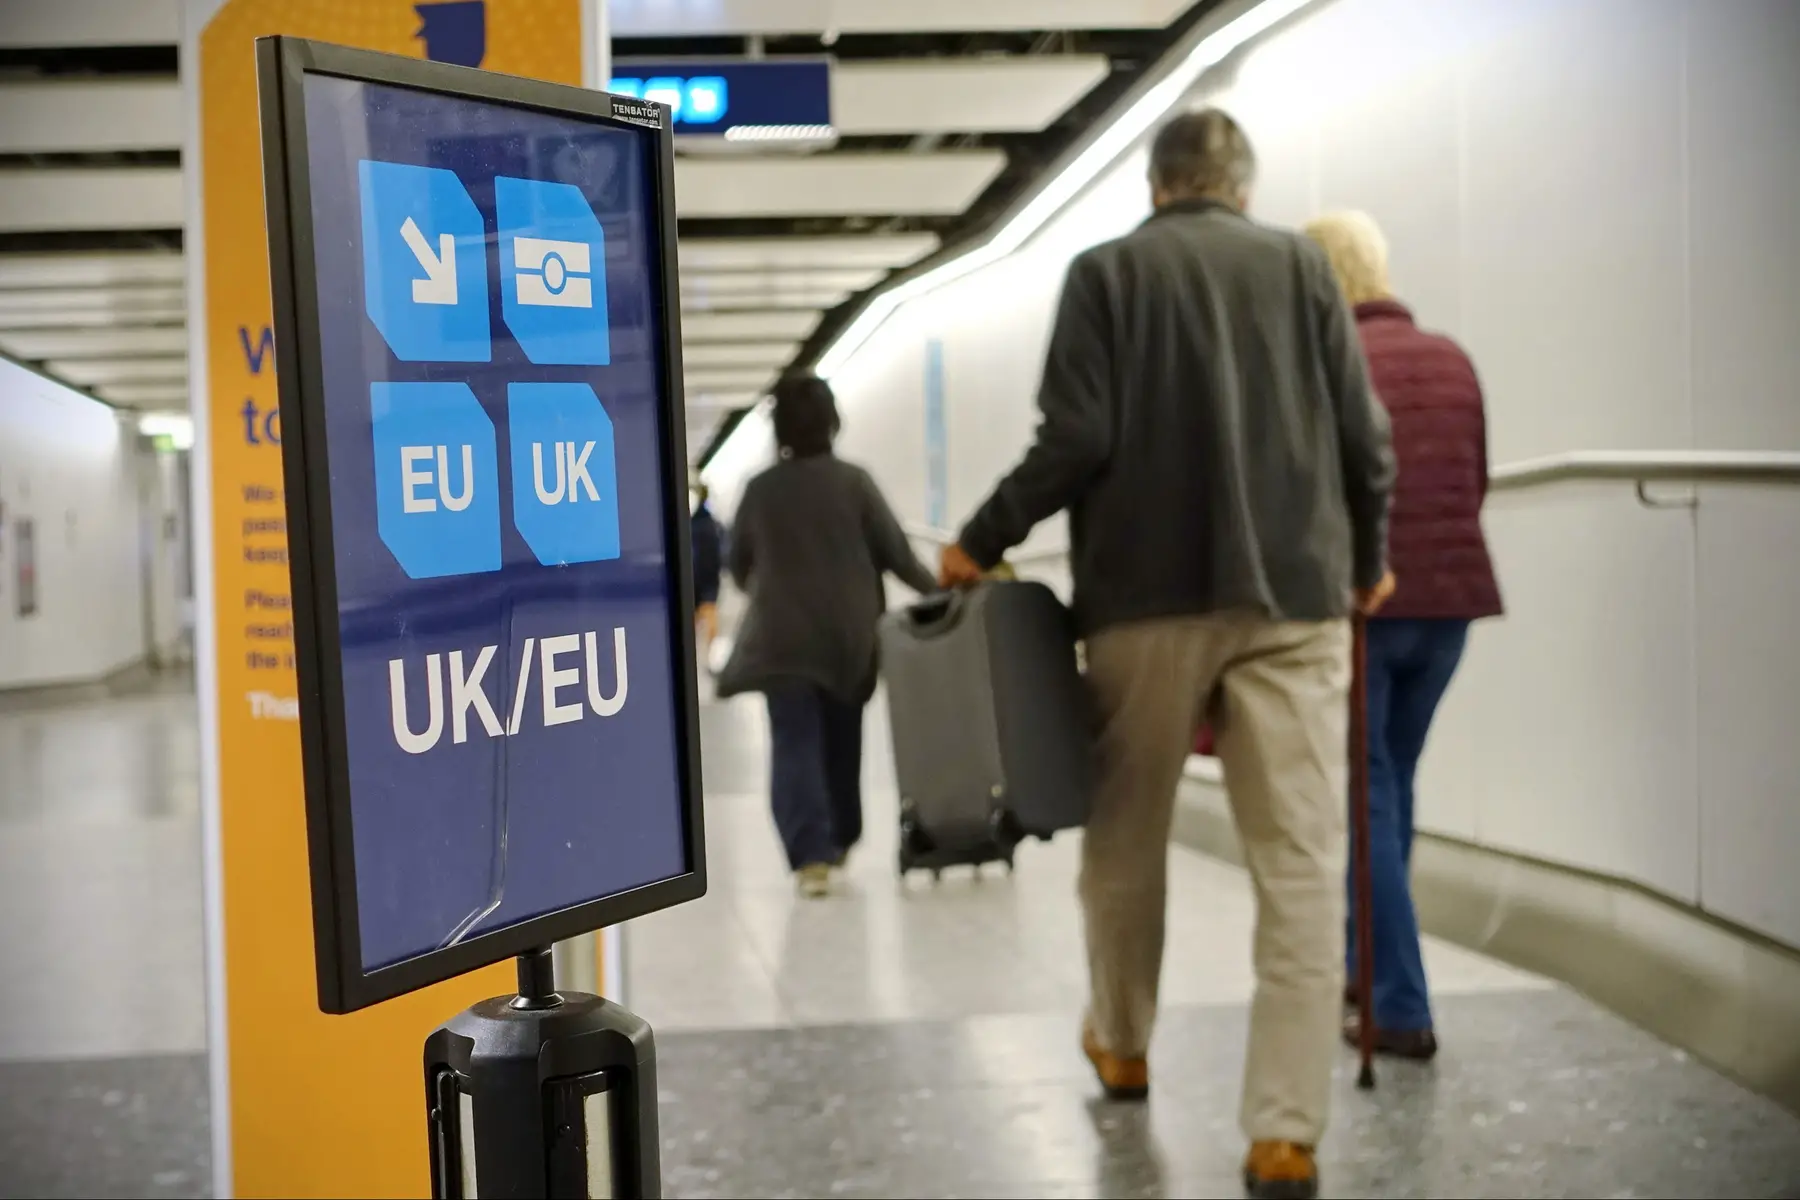 Families arriving from the EU in the UK